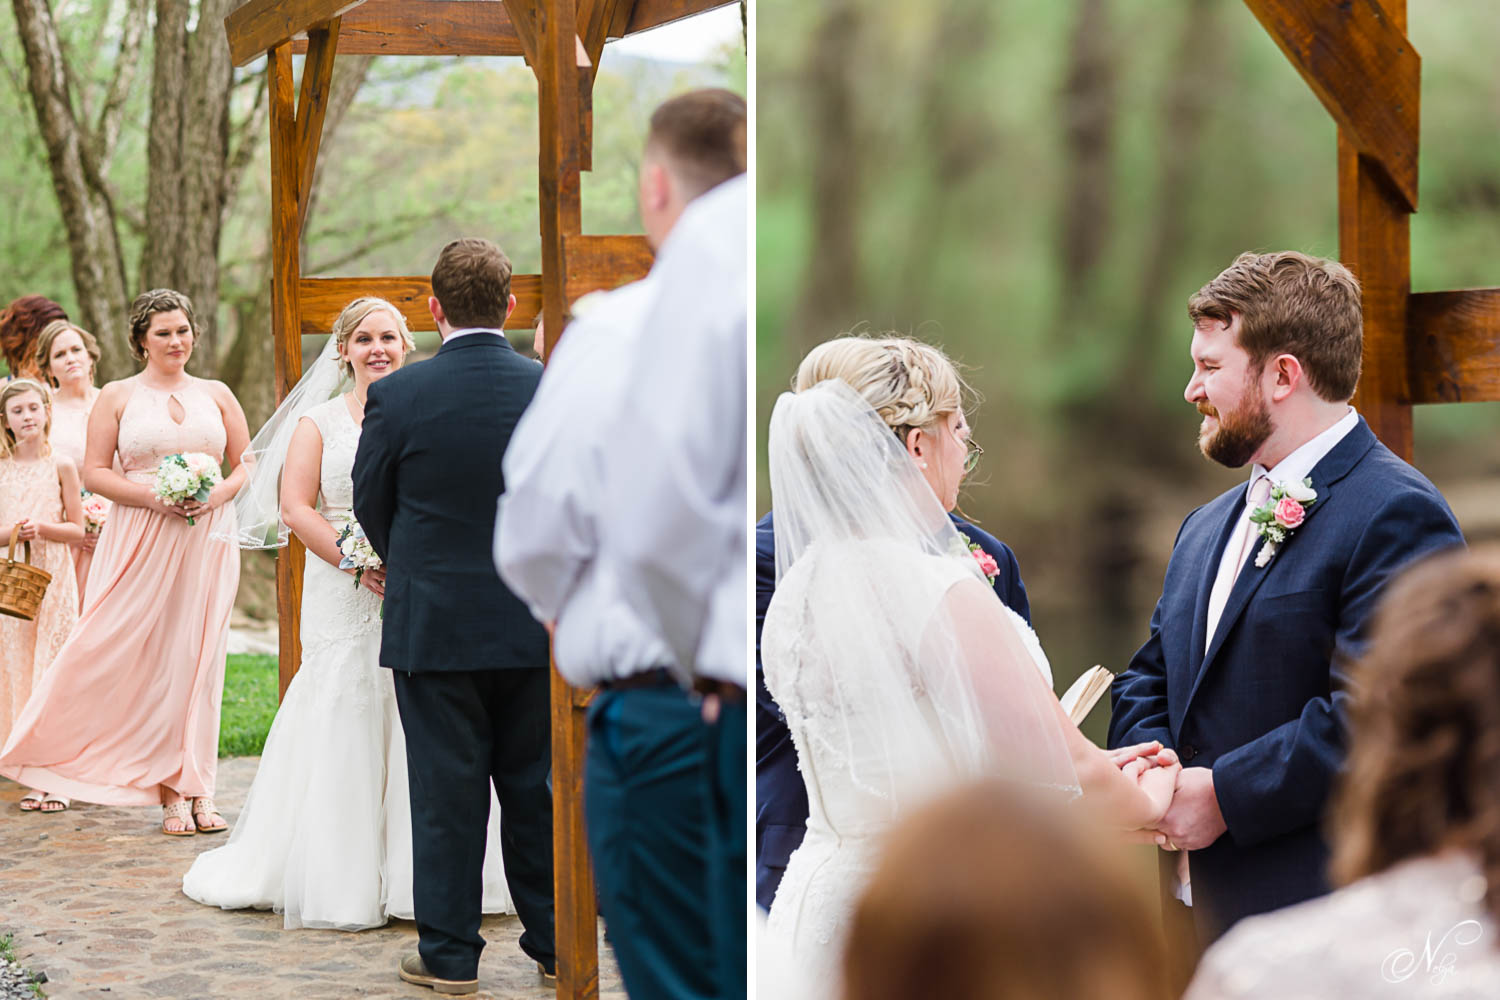 outdoor wedding ceremony by the river in east TN under wooden arbor.